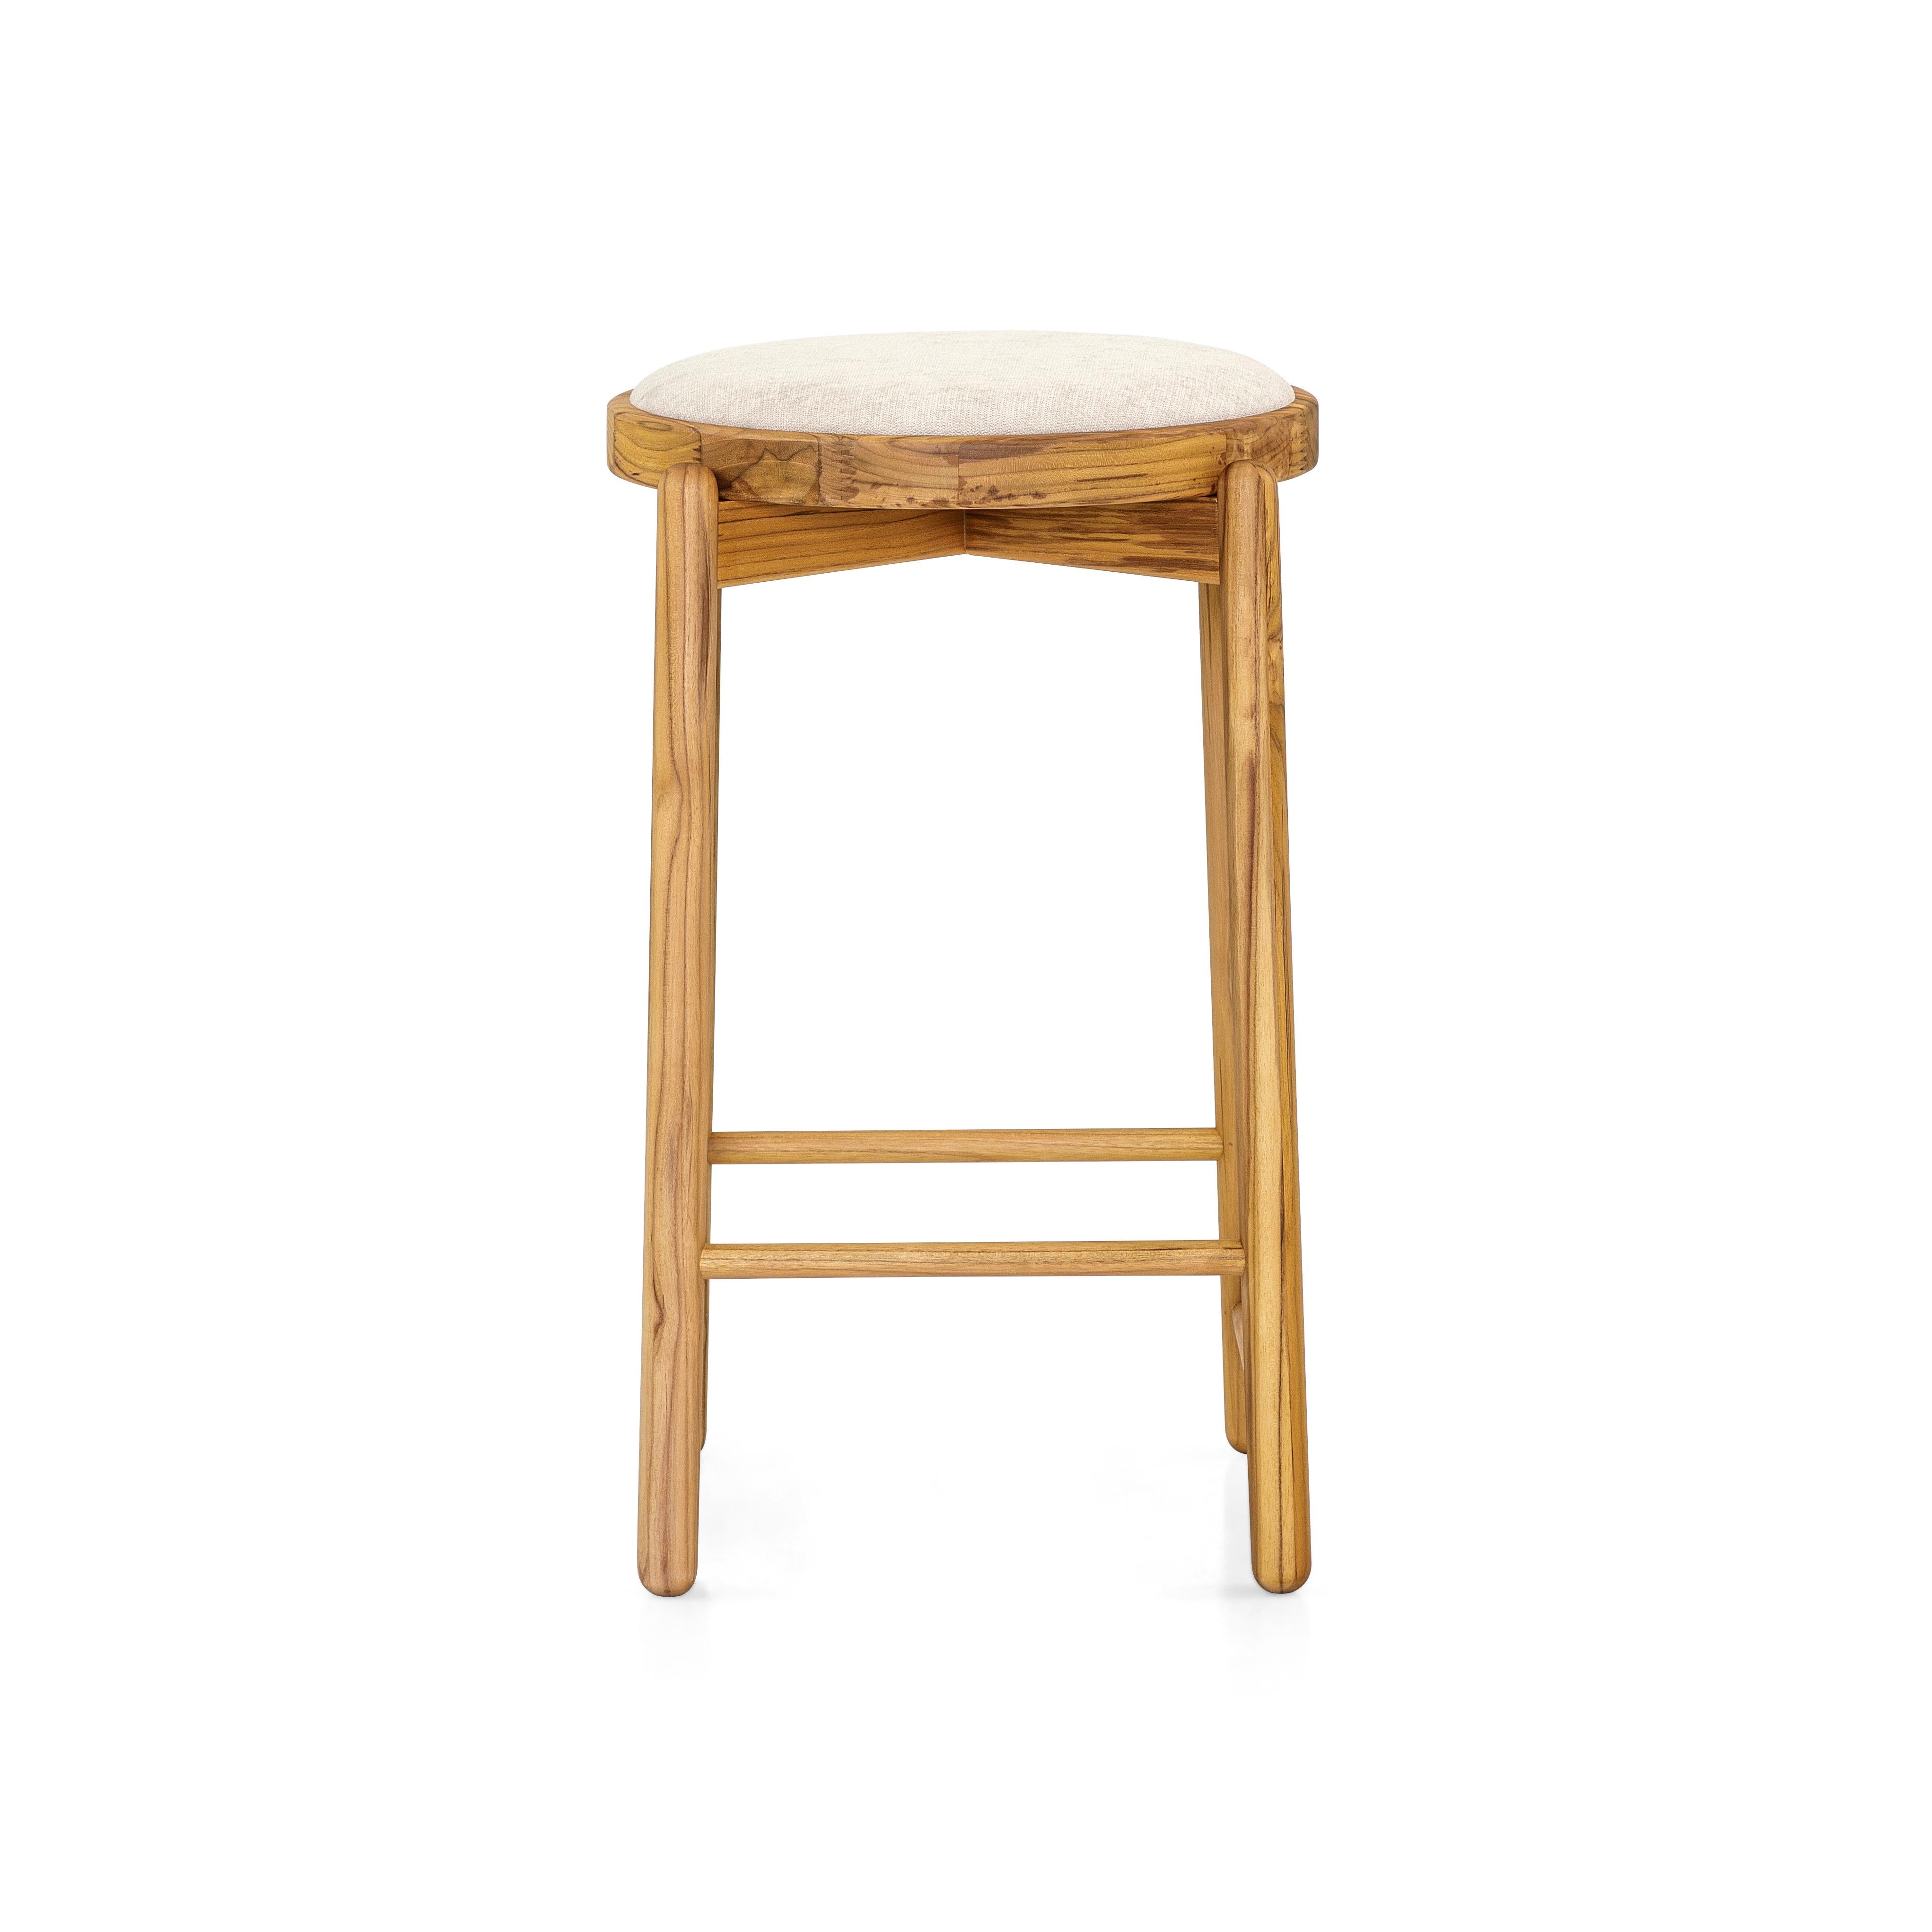 Our Uultis team has designed this Maru counter stool in a teak wood base with a matching upholstered light beige cushioned seat that will stop being only a decoration counter stool to become part of the day-to-day lives of those who experience